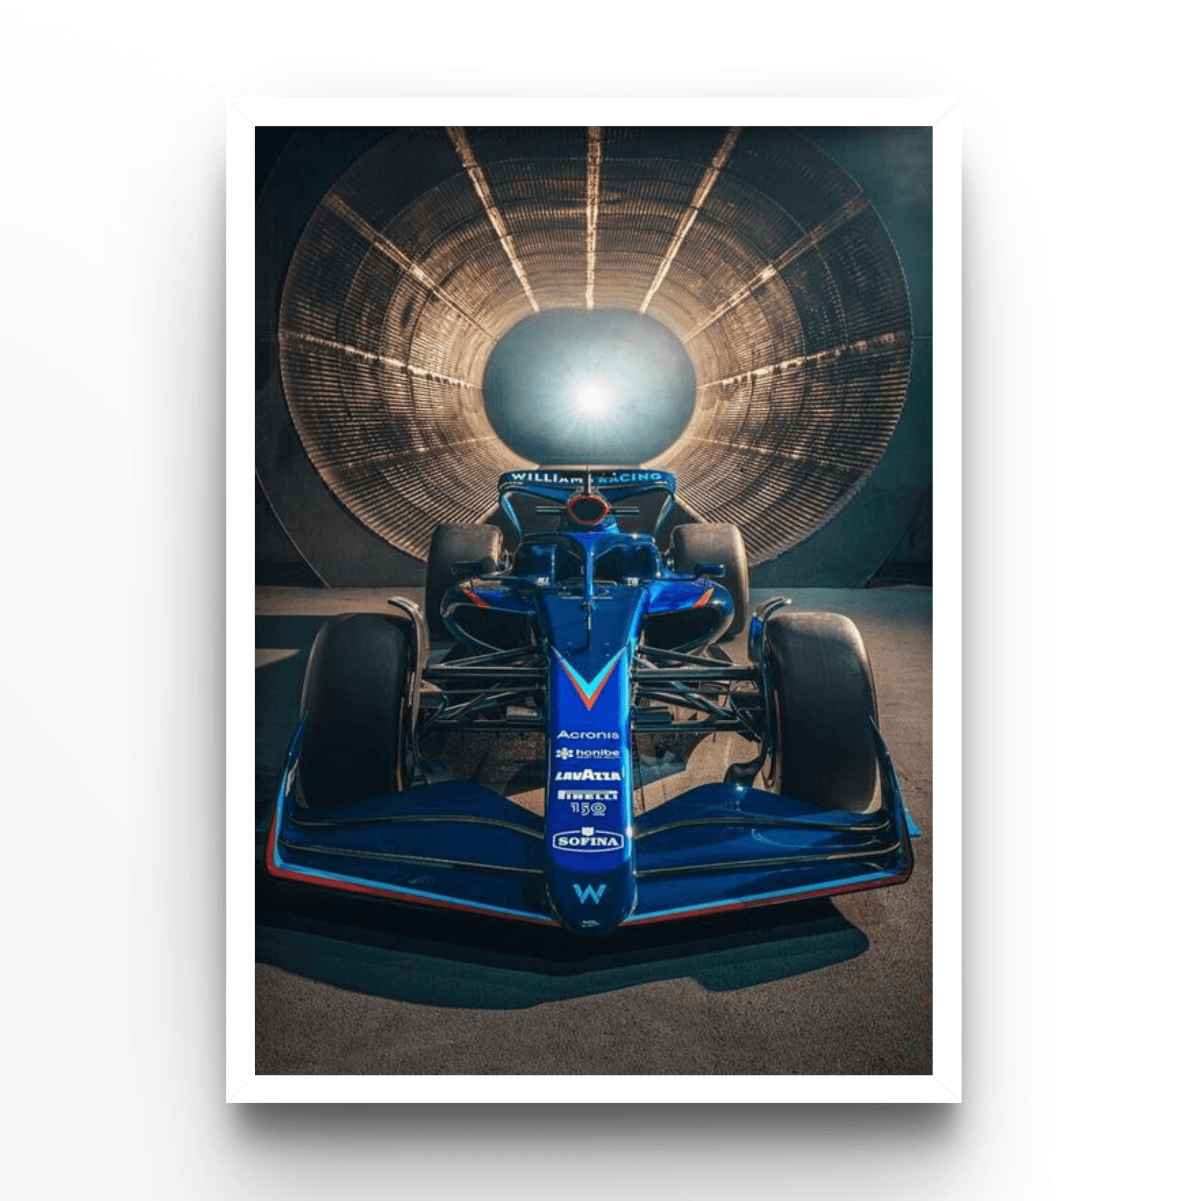 William Racing F1 - A4, A3, A2 Posters Base - Poster Print Shop / Art Prints / PostersBase